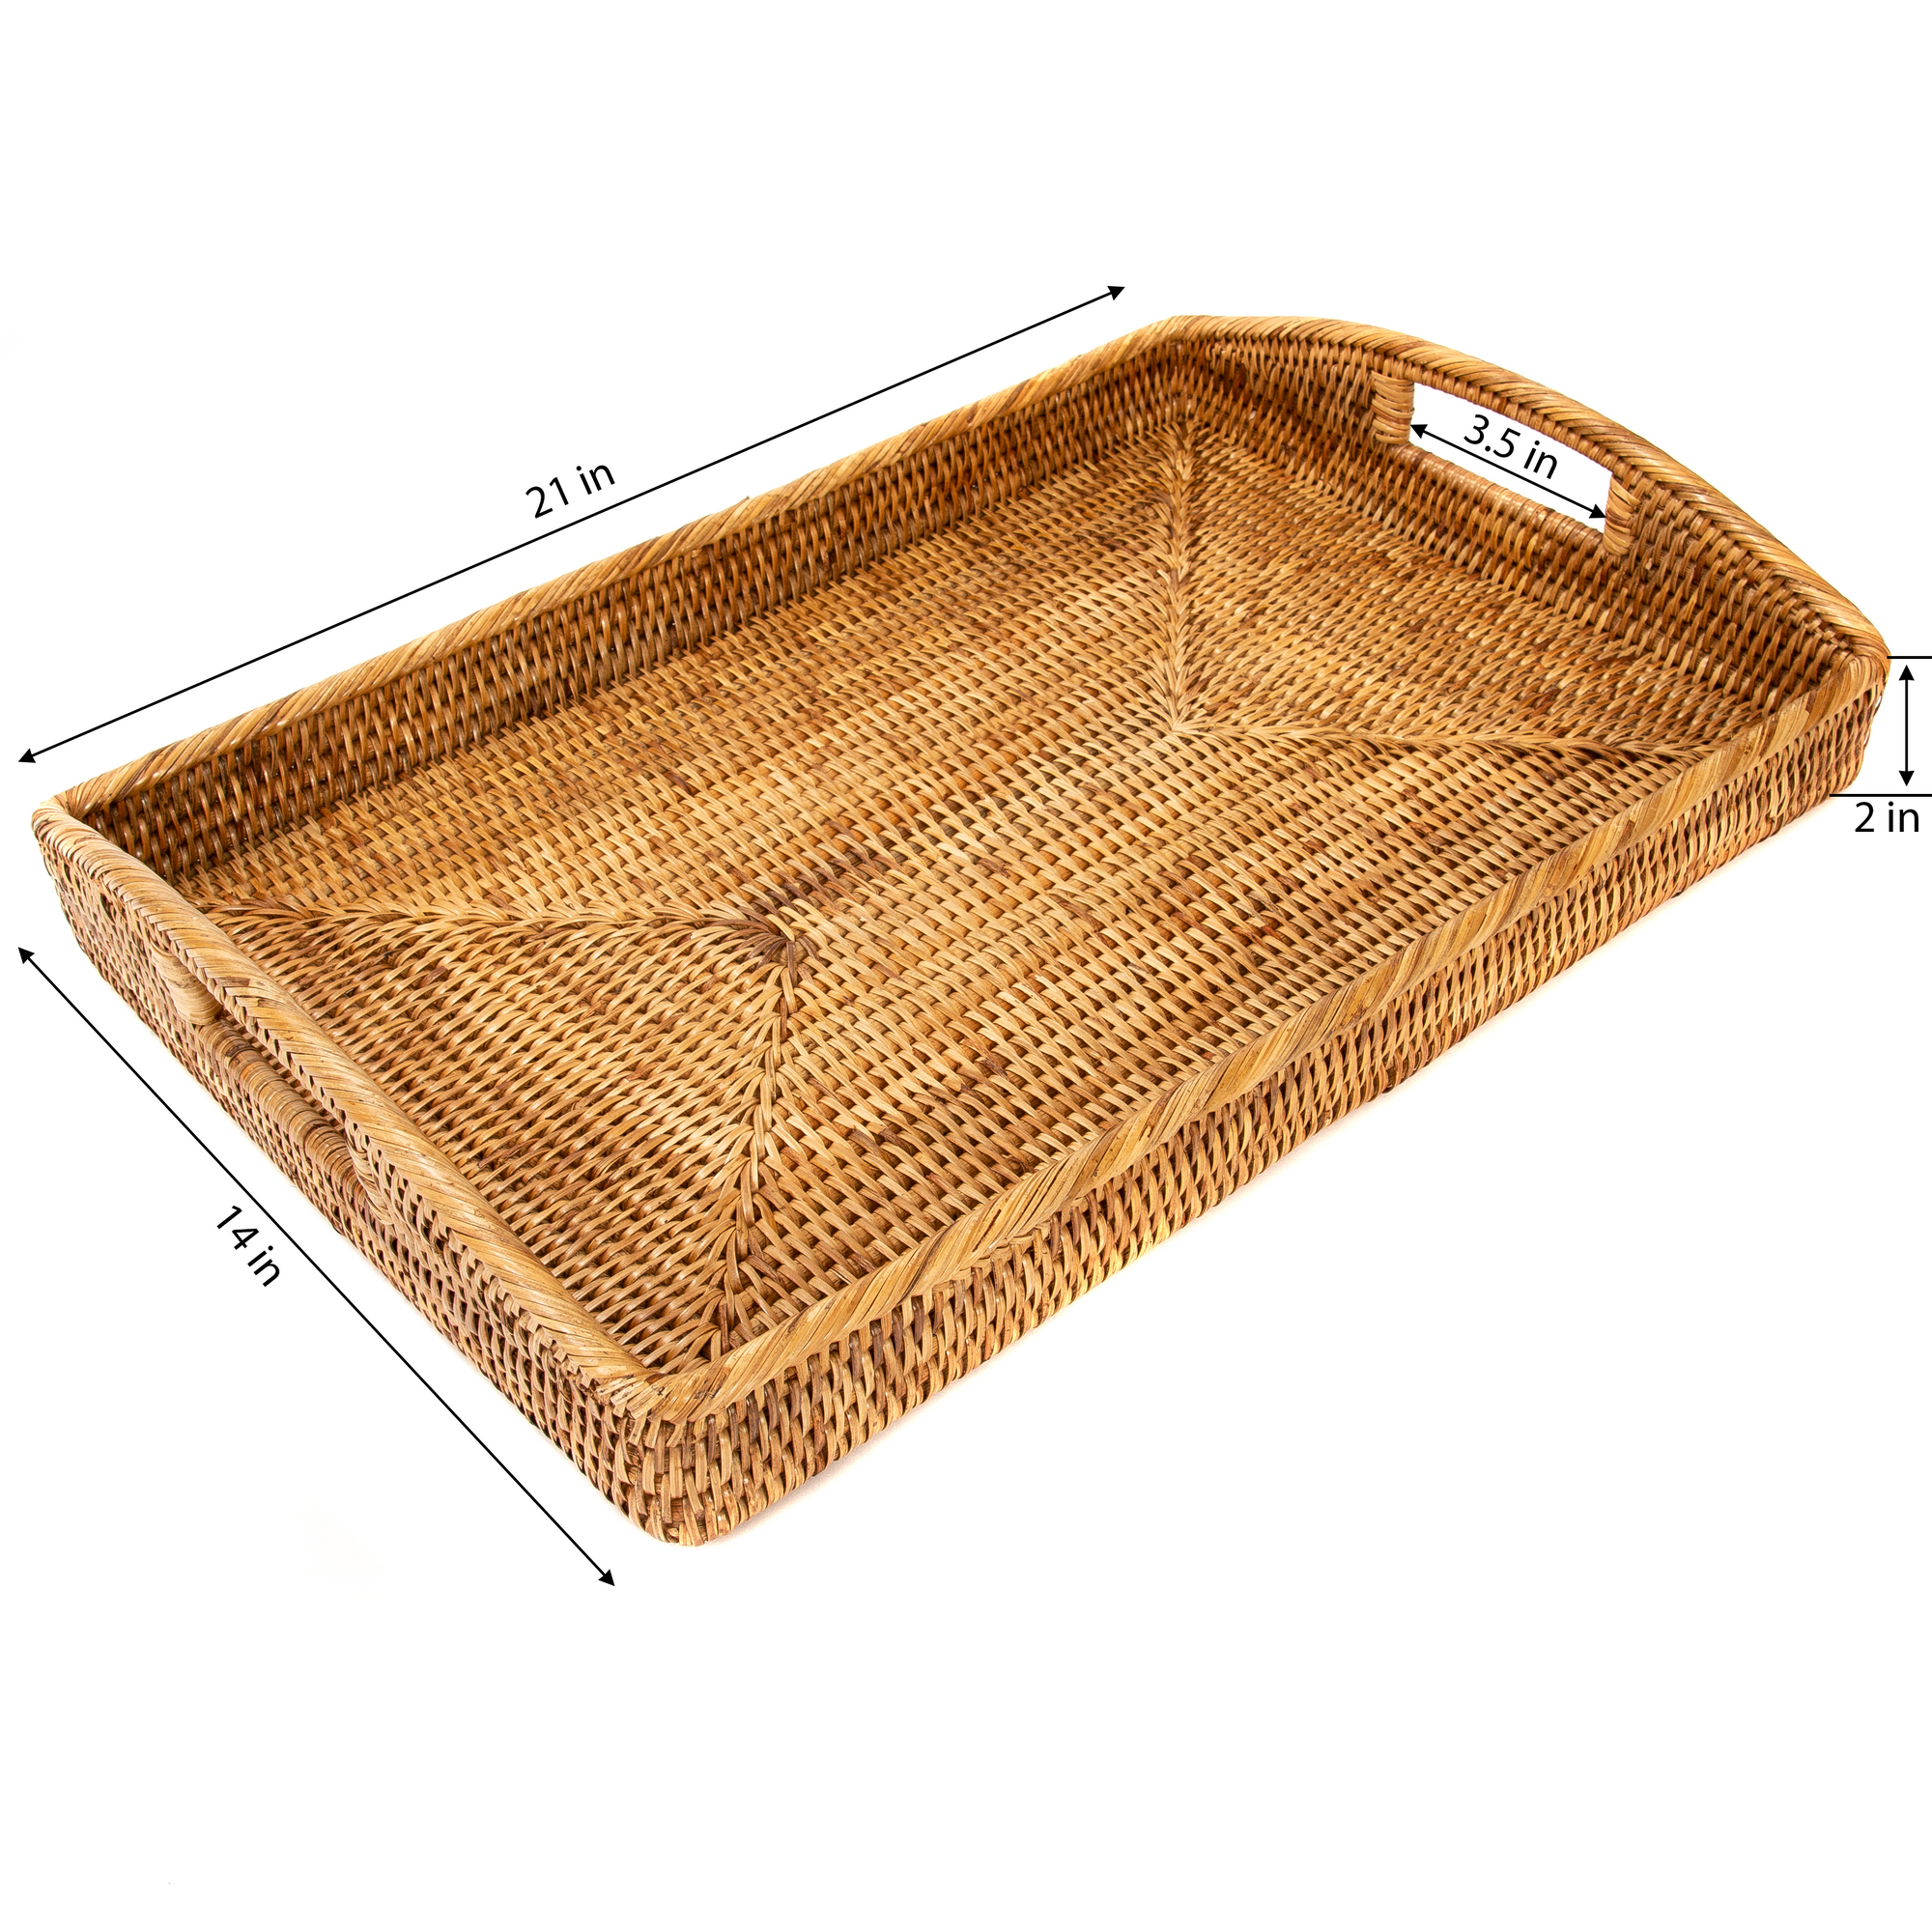 Rectangular Serving Tray Ottoman With High Handles